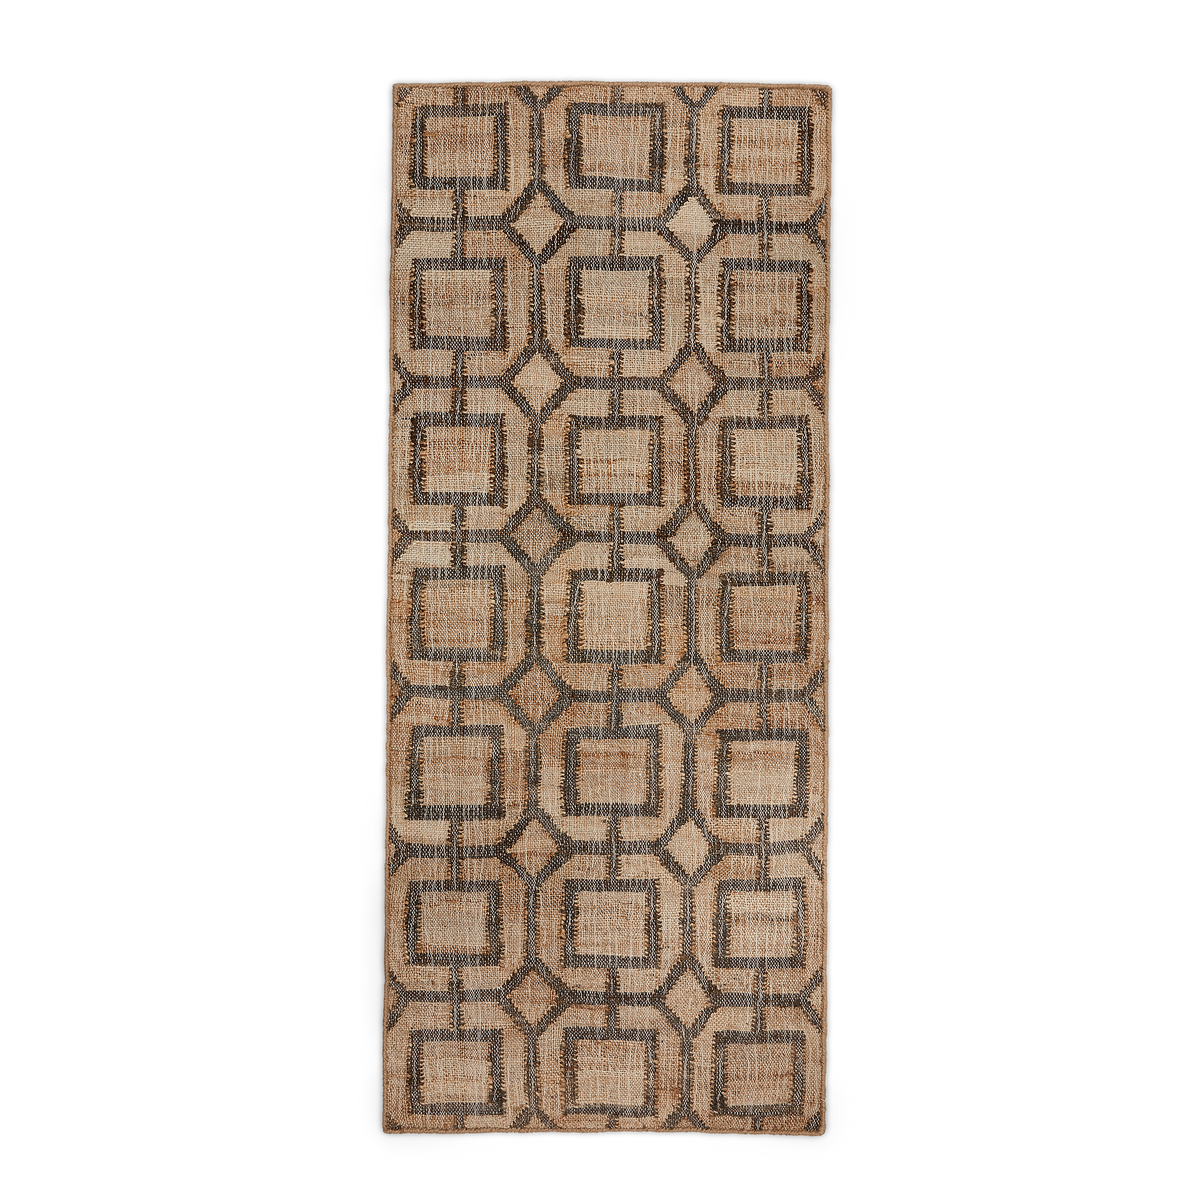 Top view, Fern hand-woven Jute and natural charcoal goemetric patterned runner.